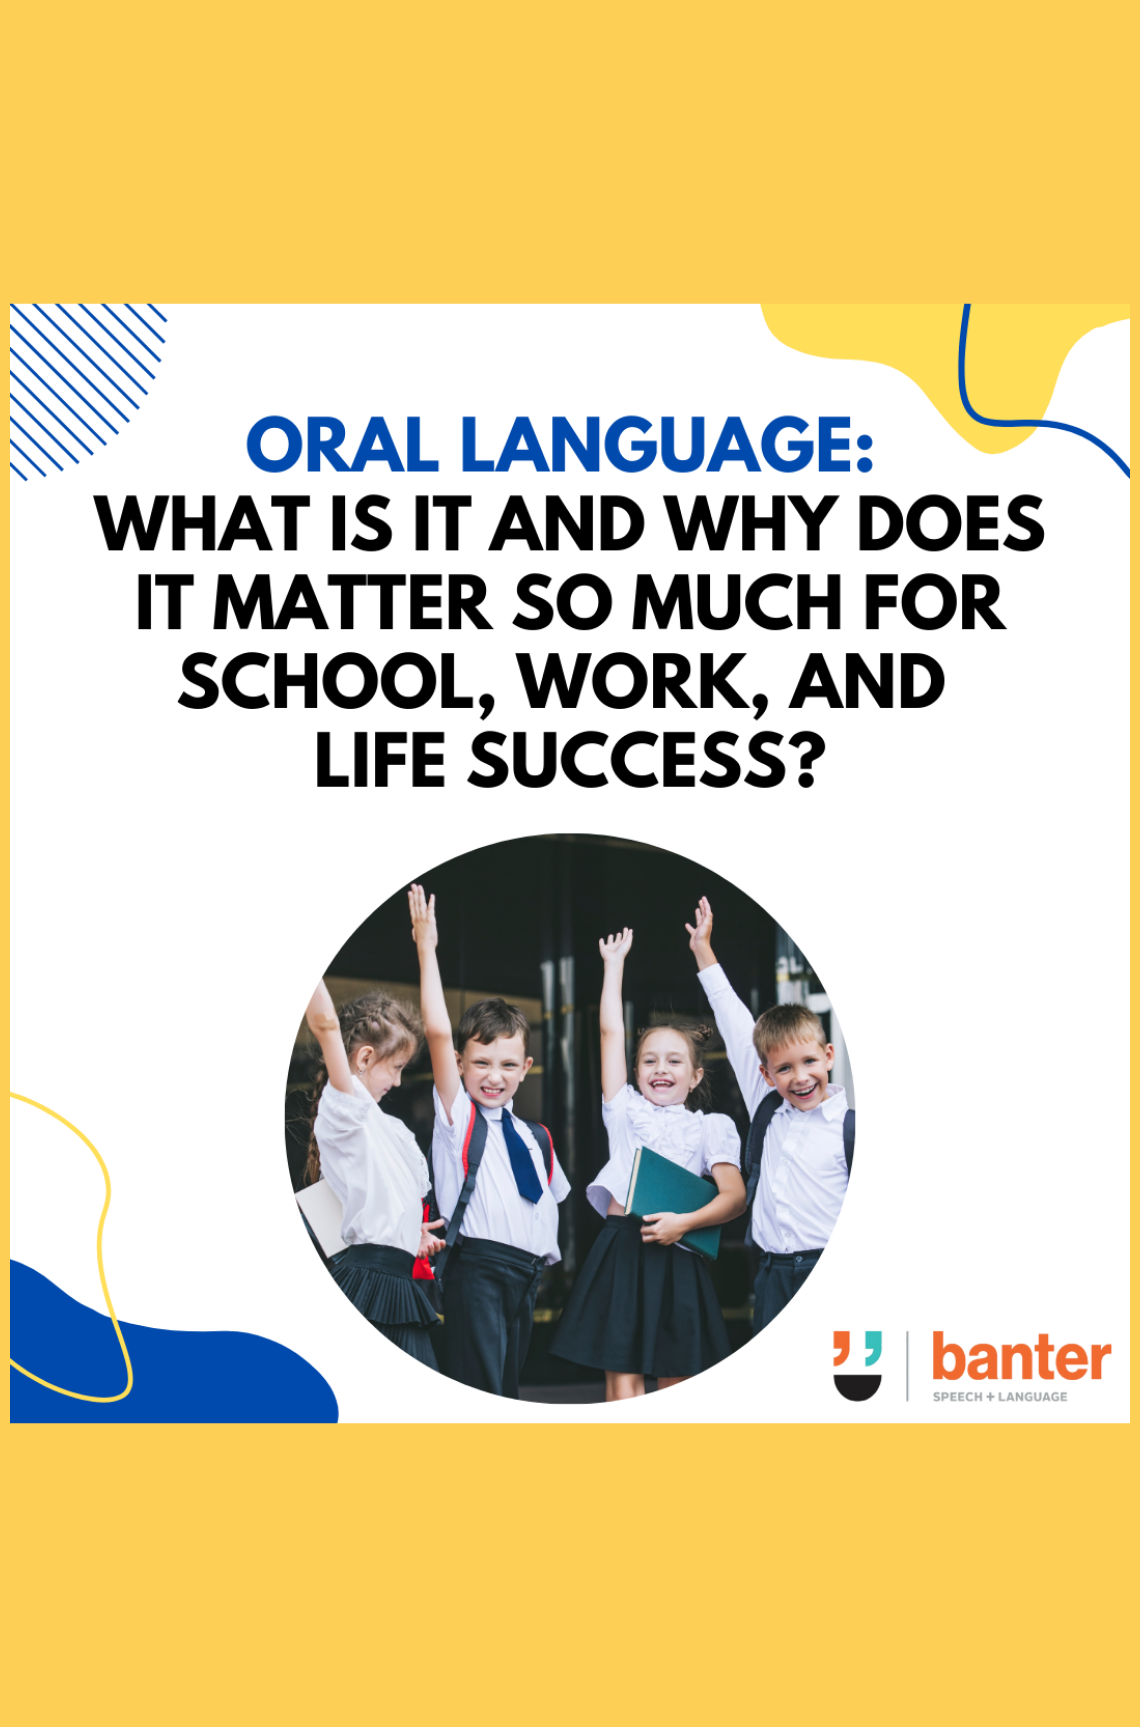 Oral Language: What is it and why does it matter so much for school, work and life success?